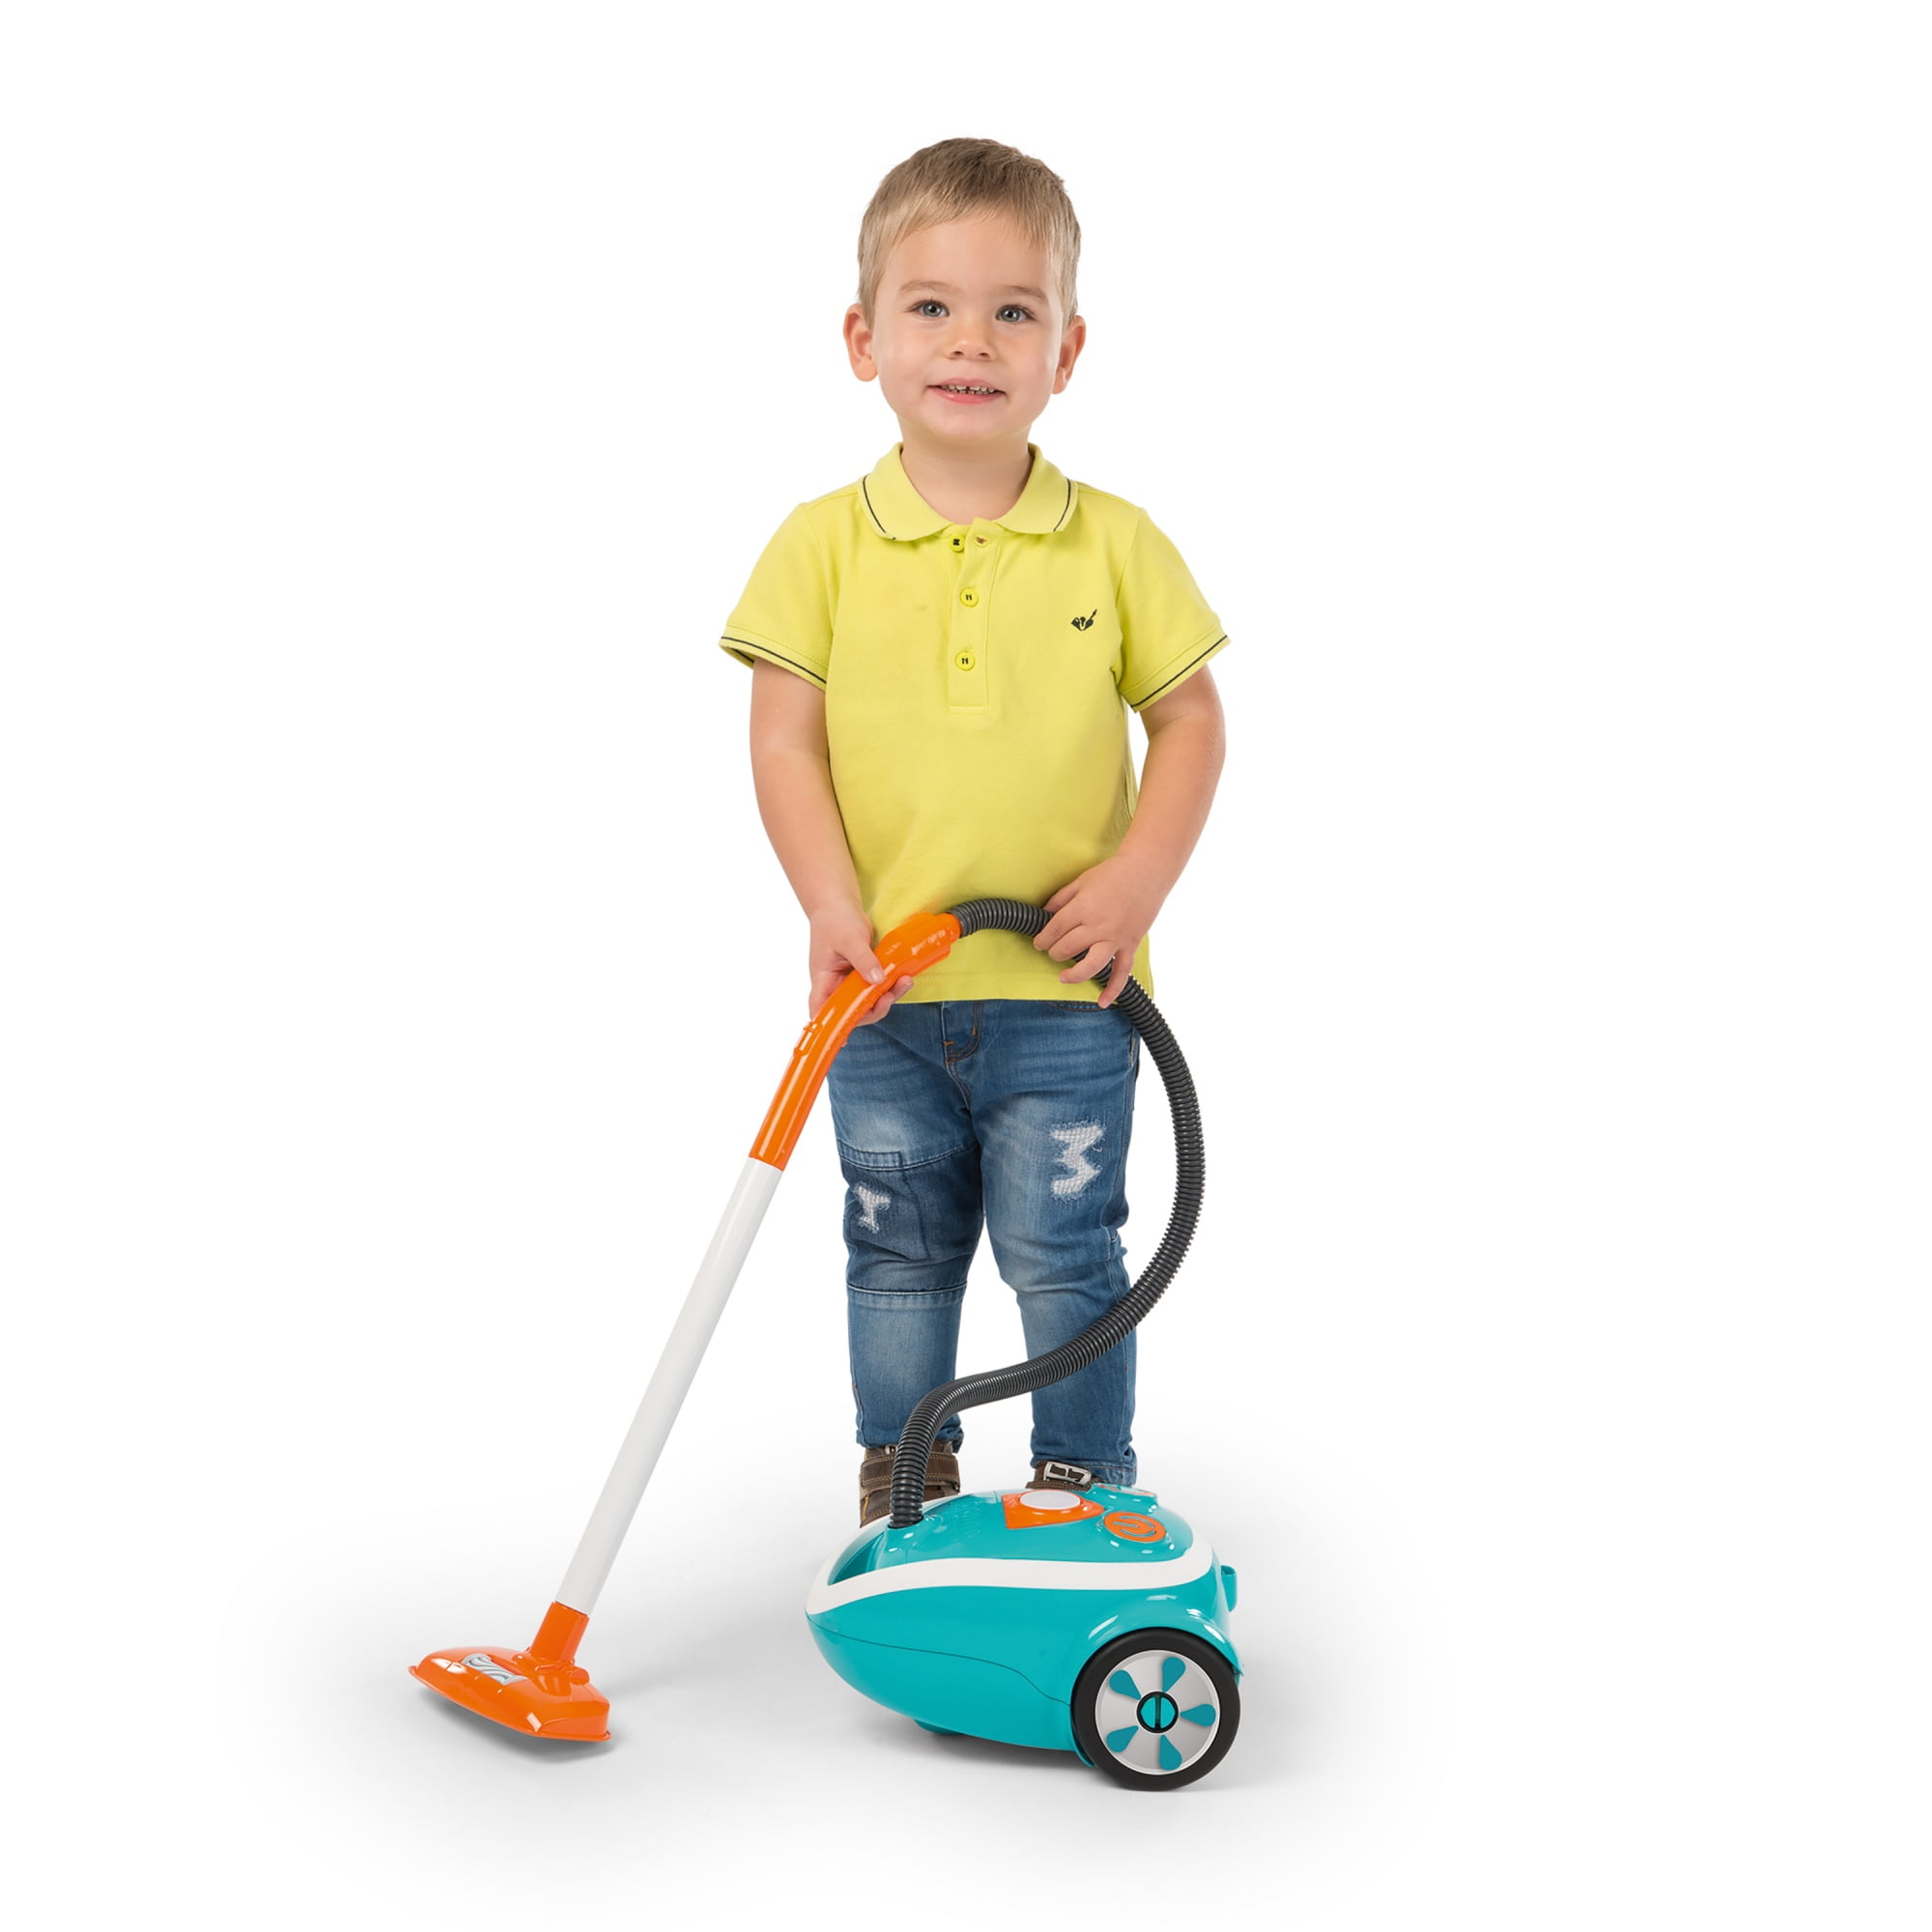 Smoby Kids Cleaning Trolley Pretend Play Toy for Ages 3+